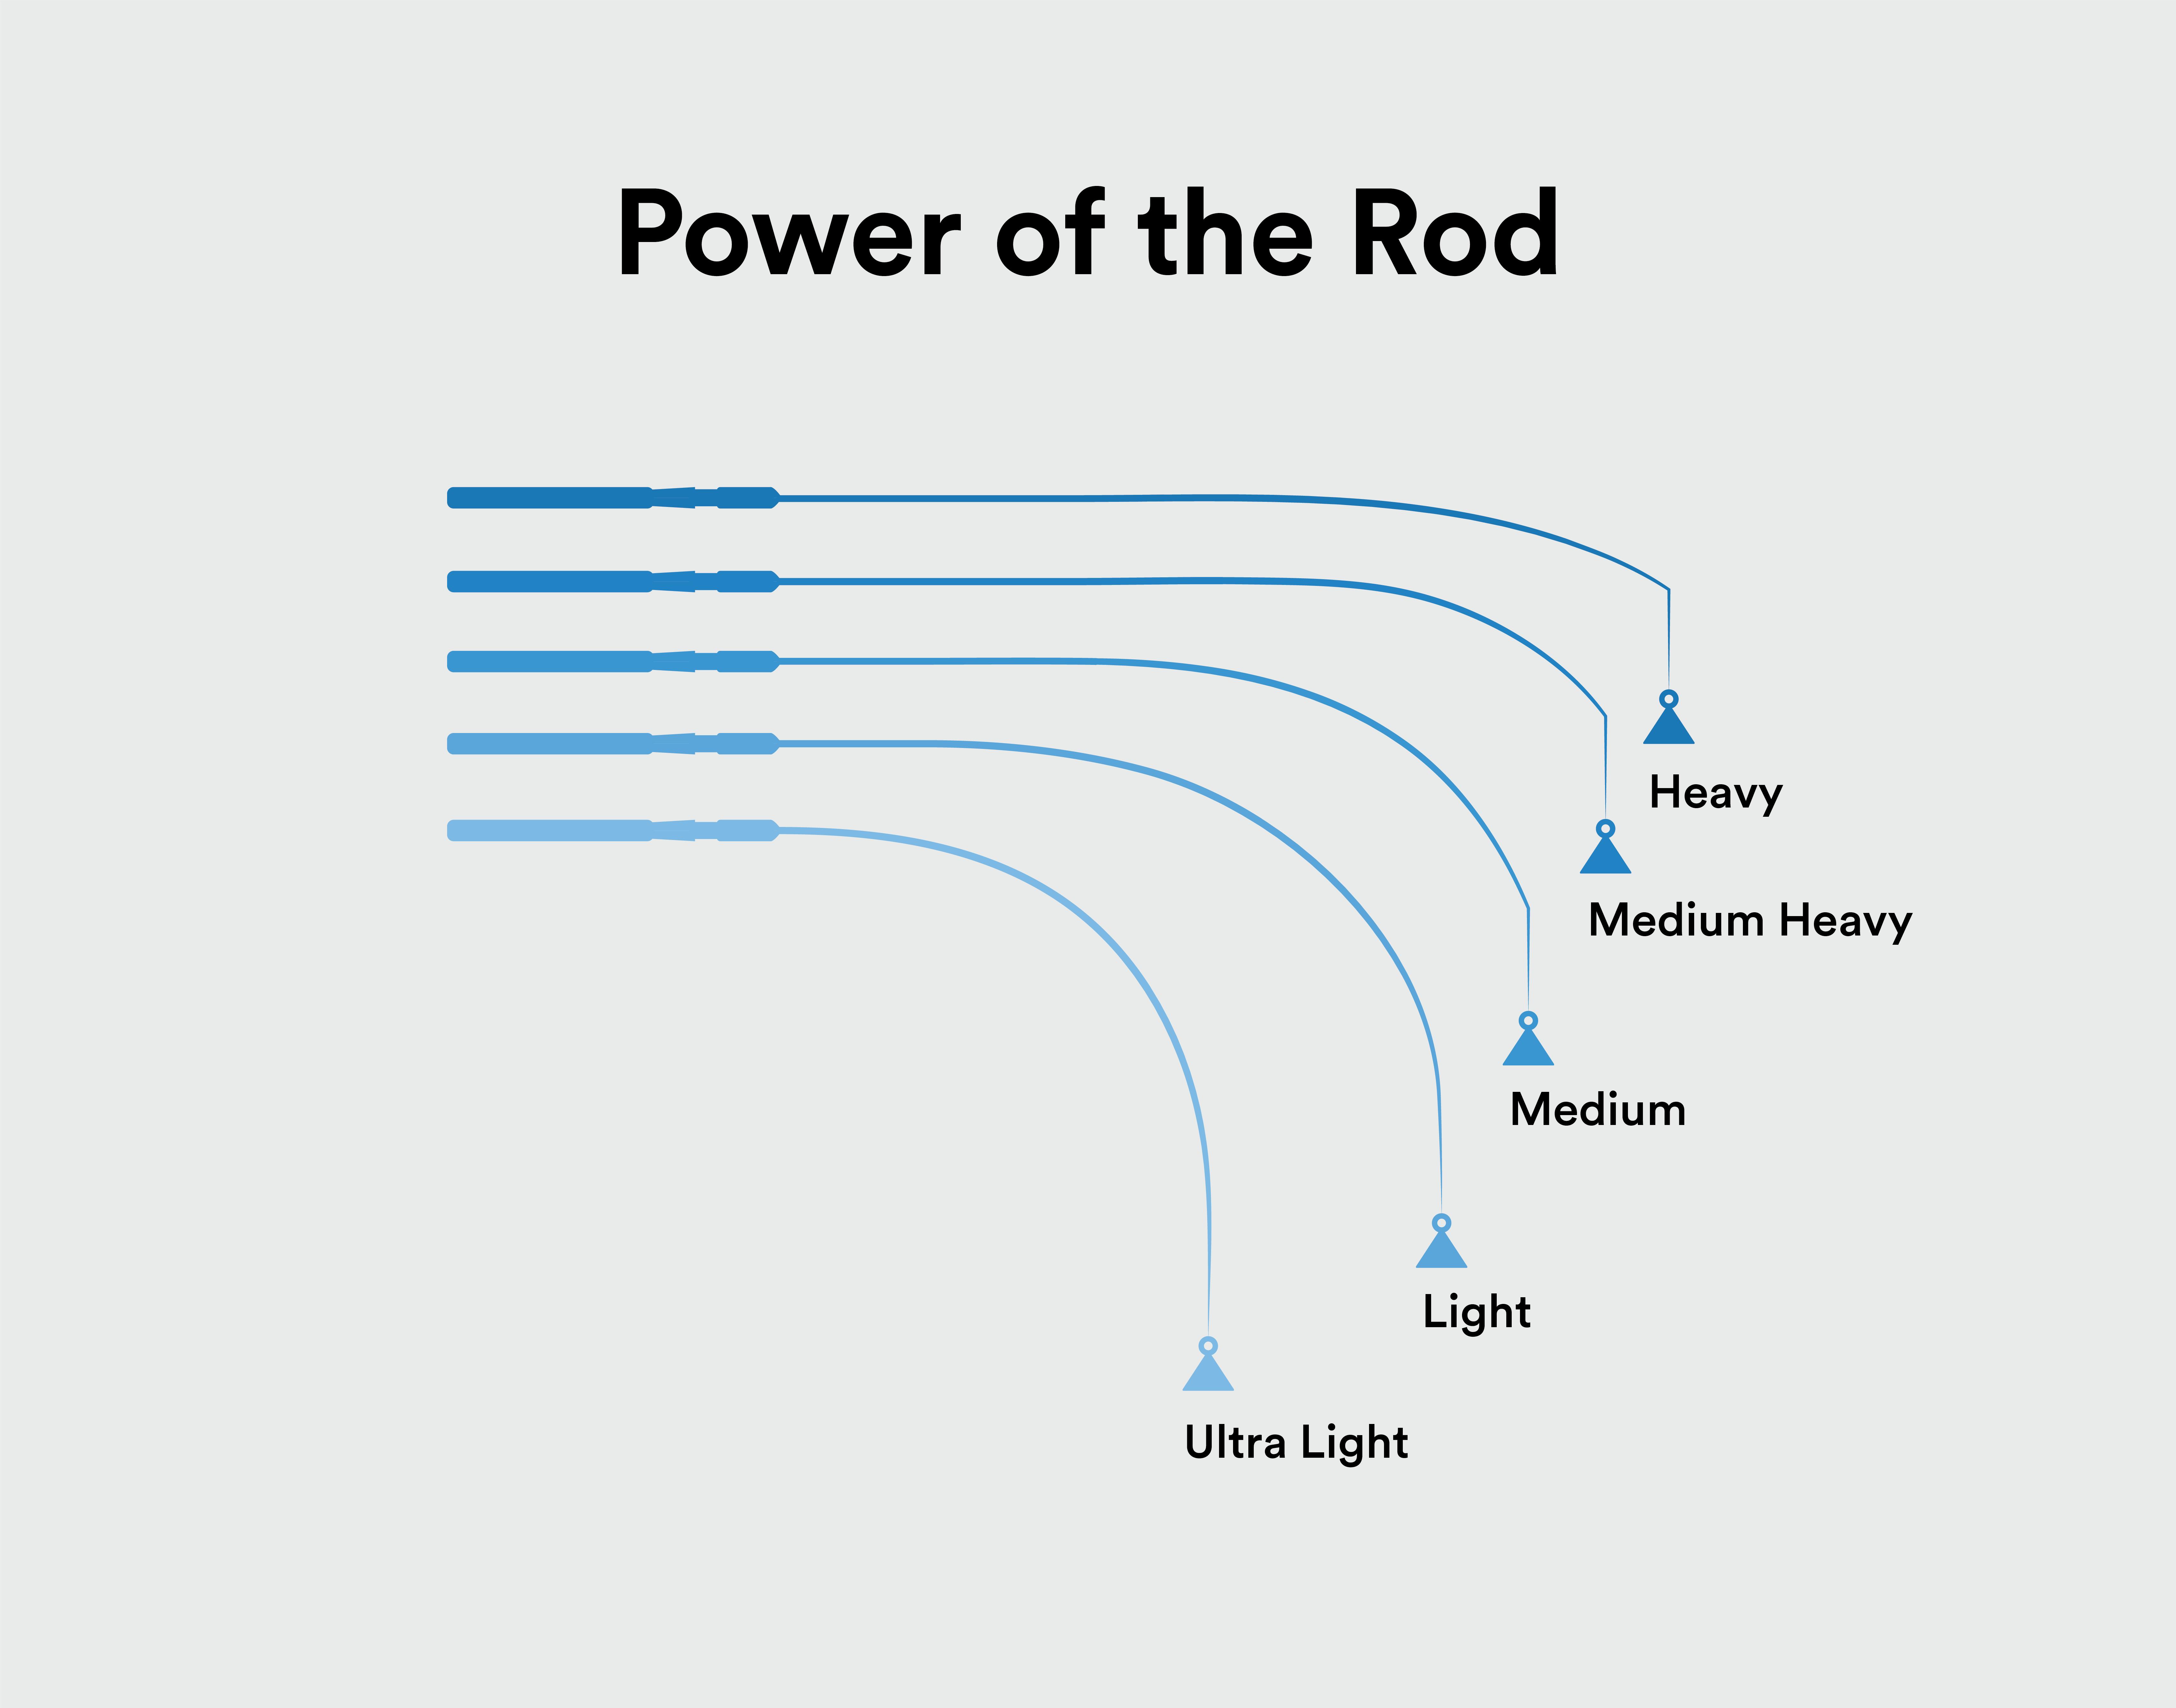 A diagram breaking down fishing rod power from heavy to ultra light.